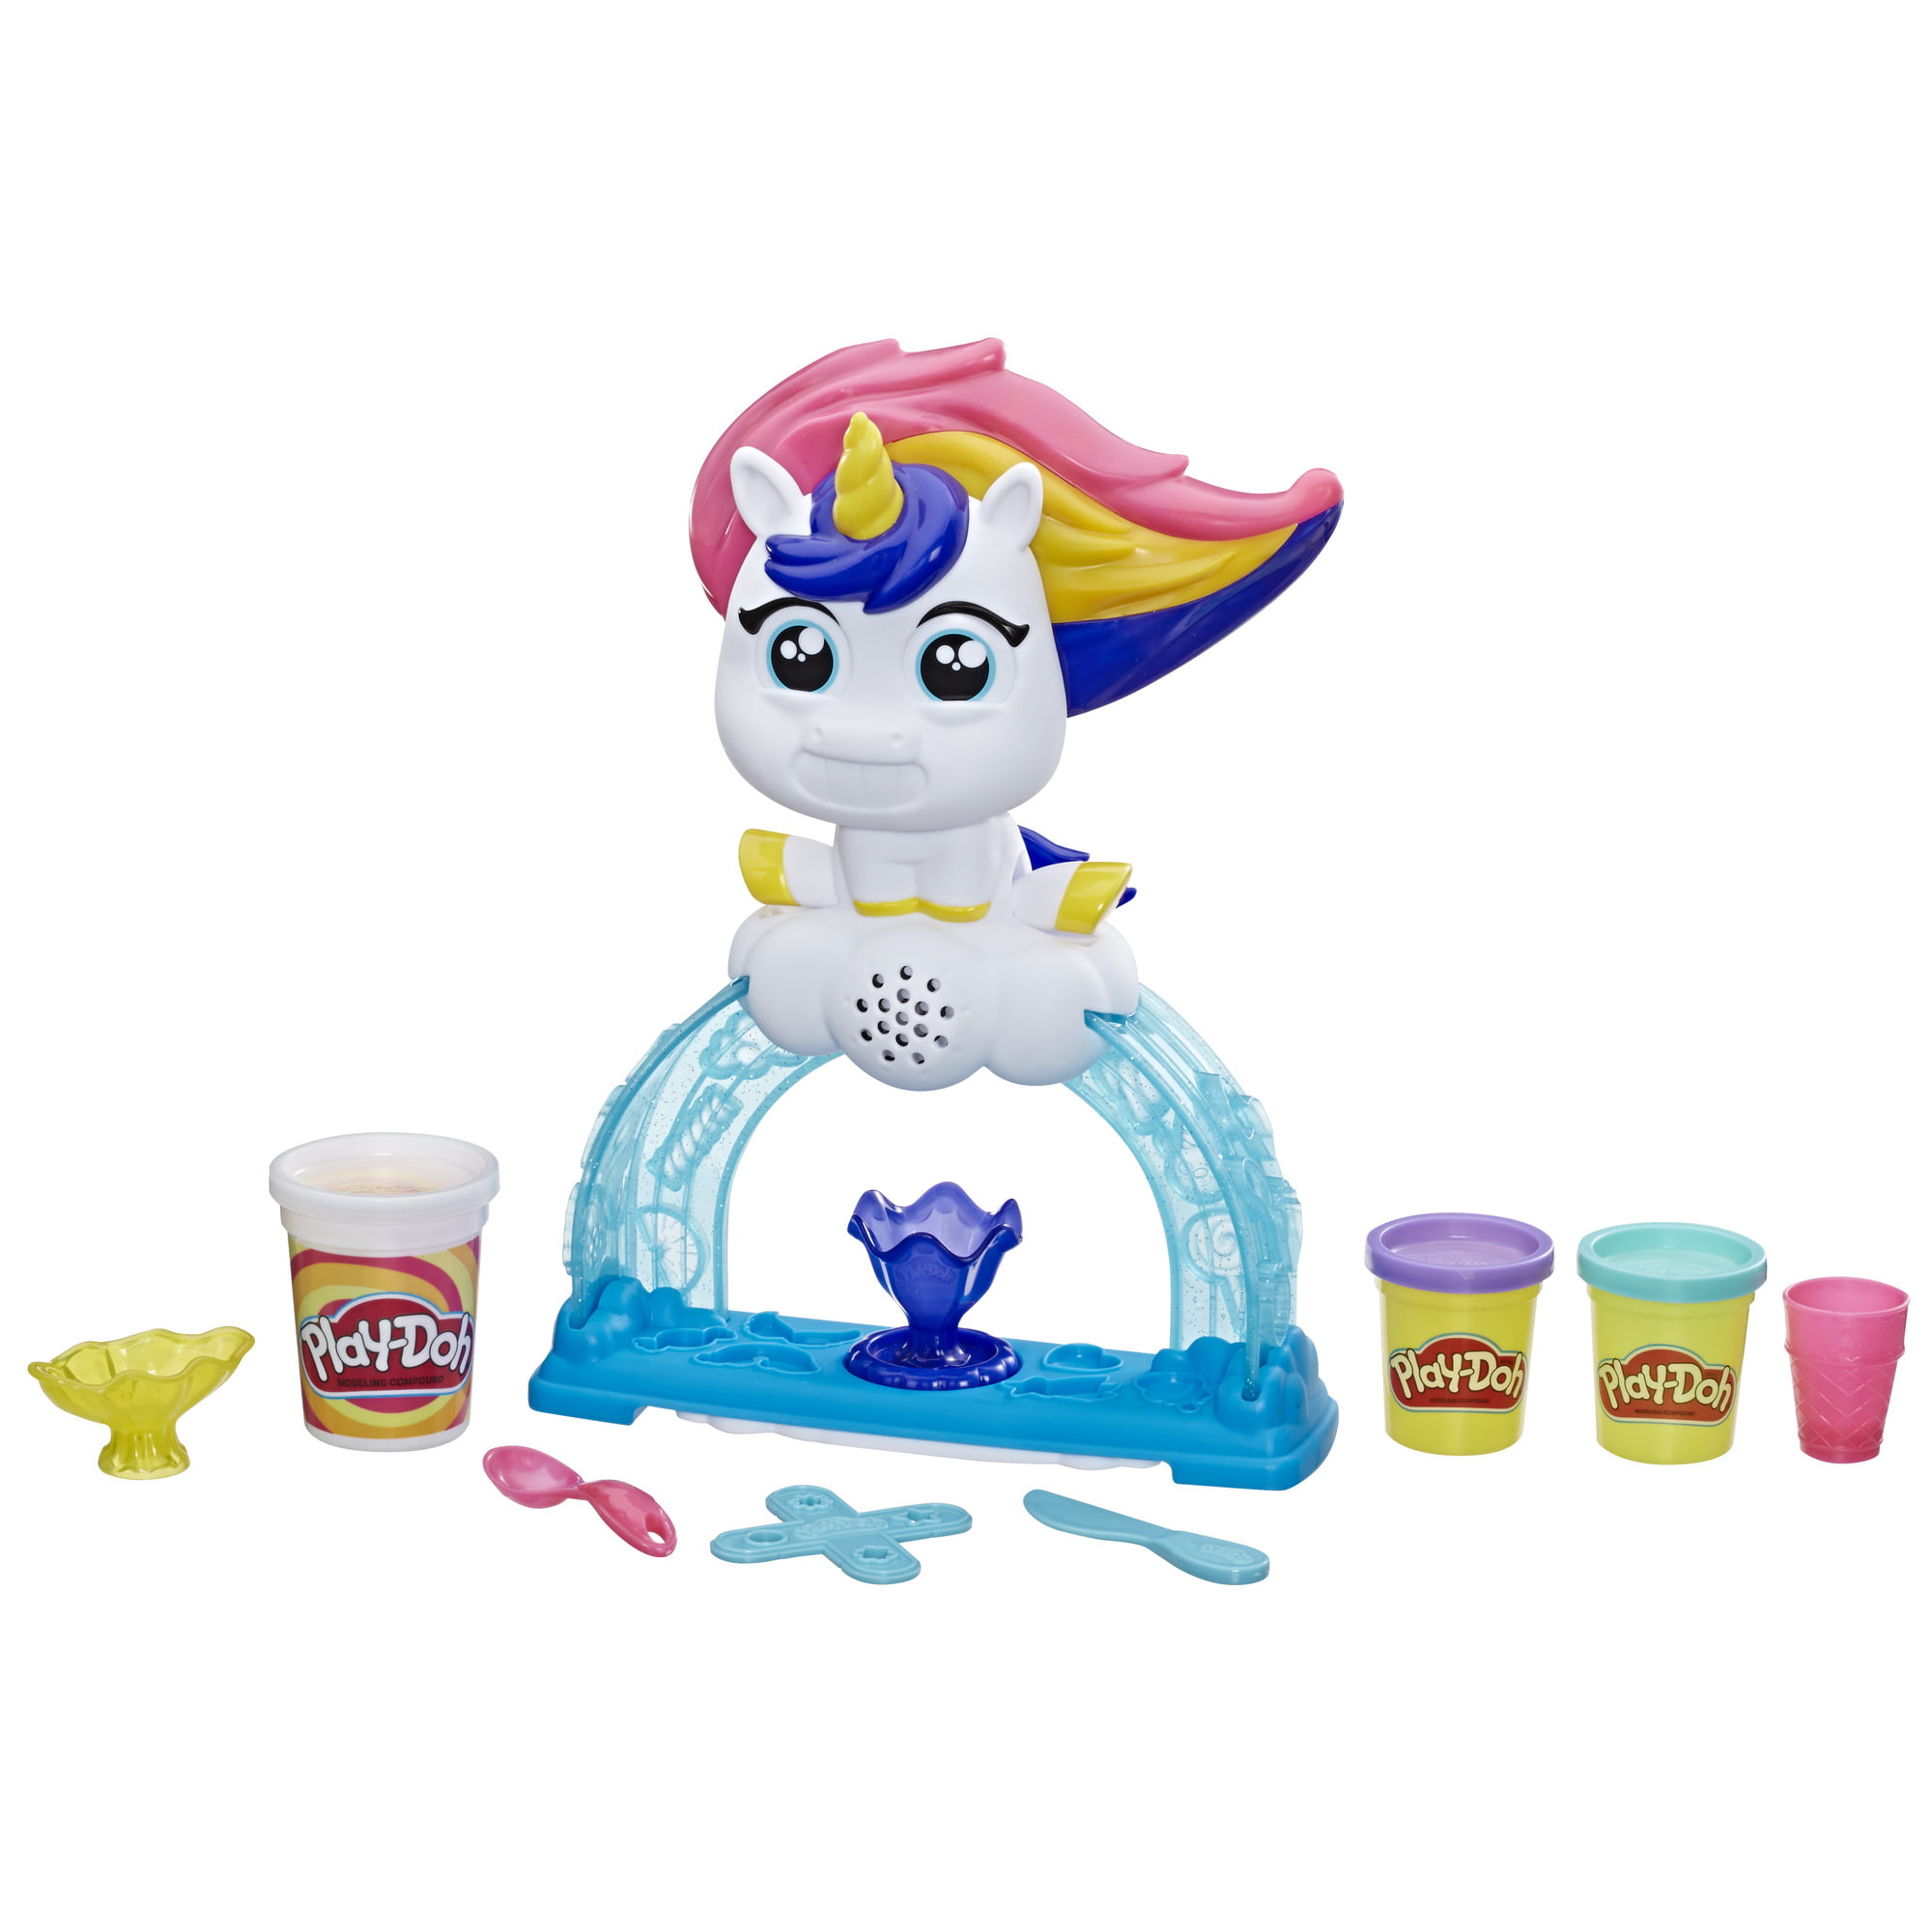 Play-Doh Tootie the Unicorn Ice Cream Set, 3 Cans of Color Swirl (8 oz) - image 4 of 11